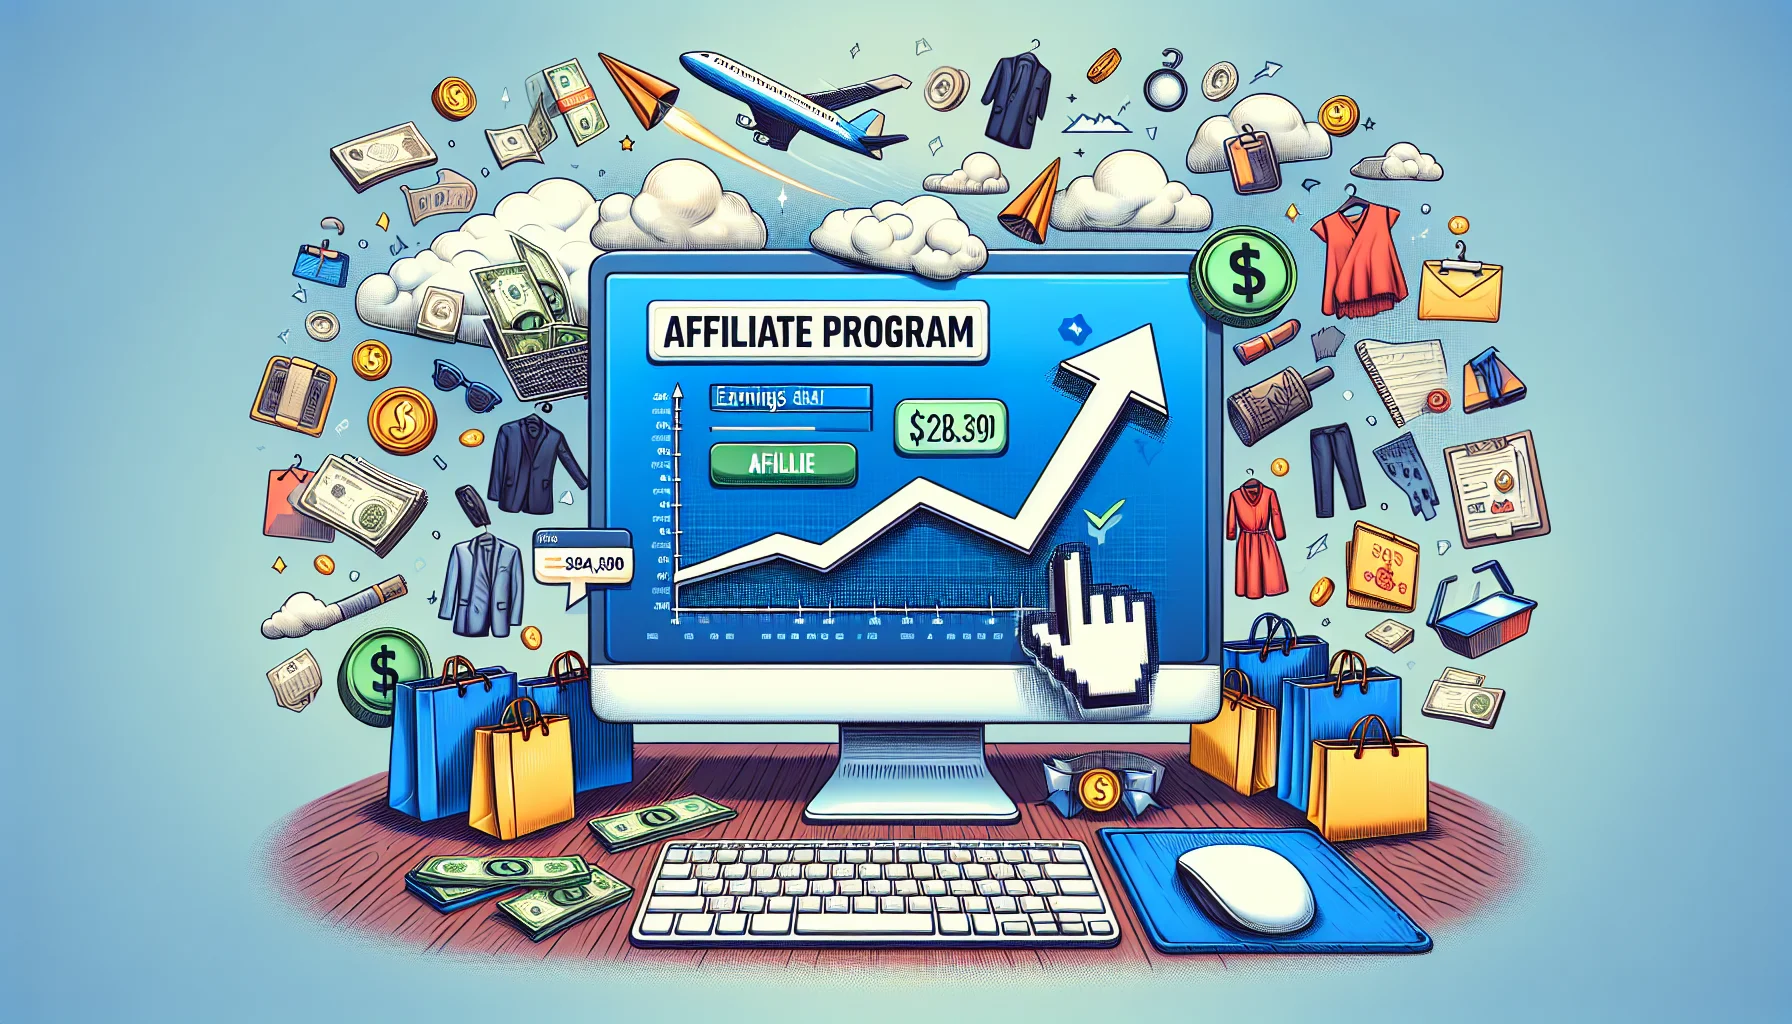 Create a comical, visually realistic representation of an online affiliate program associated with a large, unnamed department store. The scenario should be enticing and clearly linked to the concept of earning money online. Visualize a computer screen displaying an earnings chart skyrocketing as a symbol of potential profit. Around the screen, details symbolizing the affiliate program should be present such as shopping bags, clothing, and other retail items. Include a dollar sign cursor clicking on a check mark in the affiliate section. Ensure the tone of the image is light-hearted and engaging.